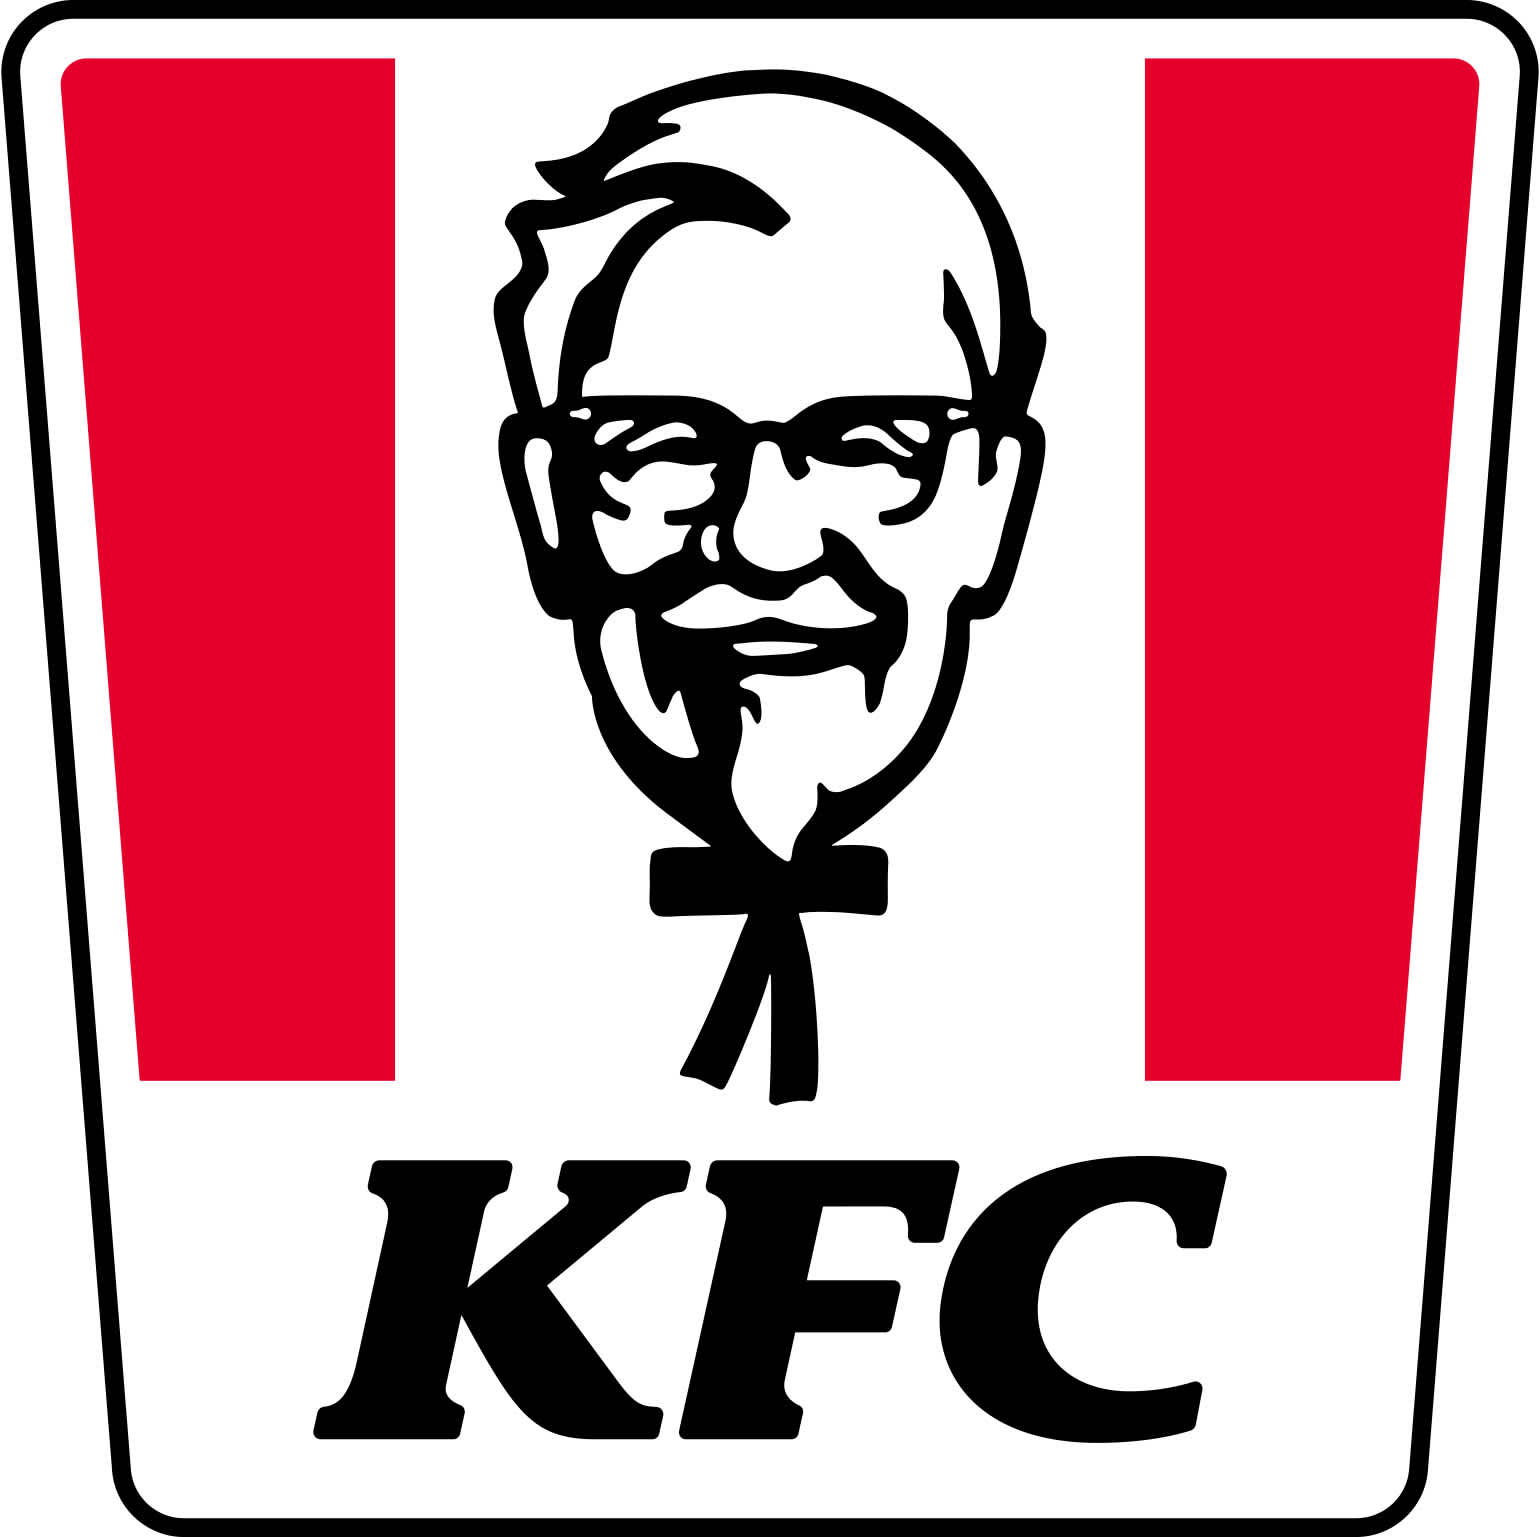 THERE’S ROOM IN THE COOP…WE’RE SEARCHING FOR KFC’S BIGGEST FAN TO BE THE FACE OF OUR NEXT CAMPAIGN AND FINGER LICK THEIR WAY TO FAME…